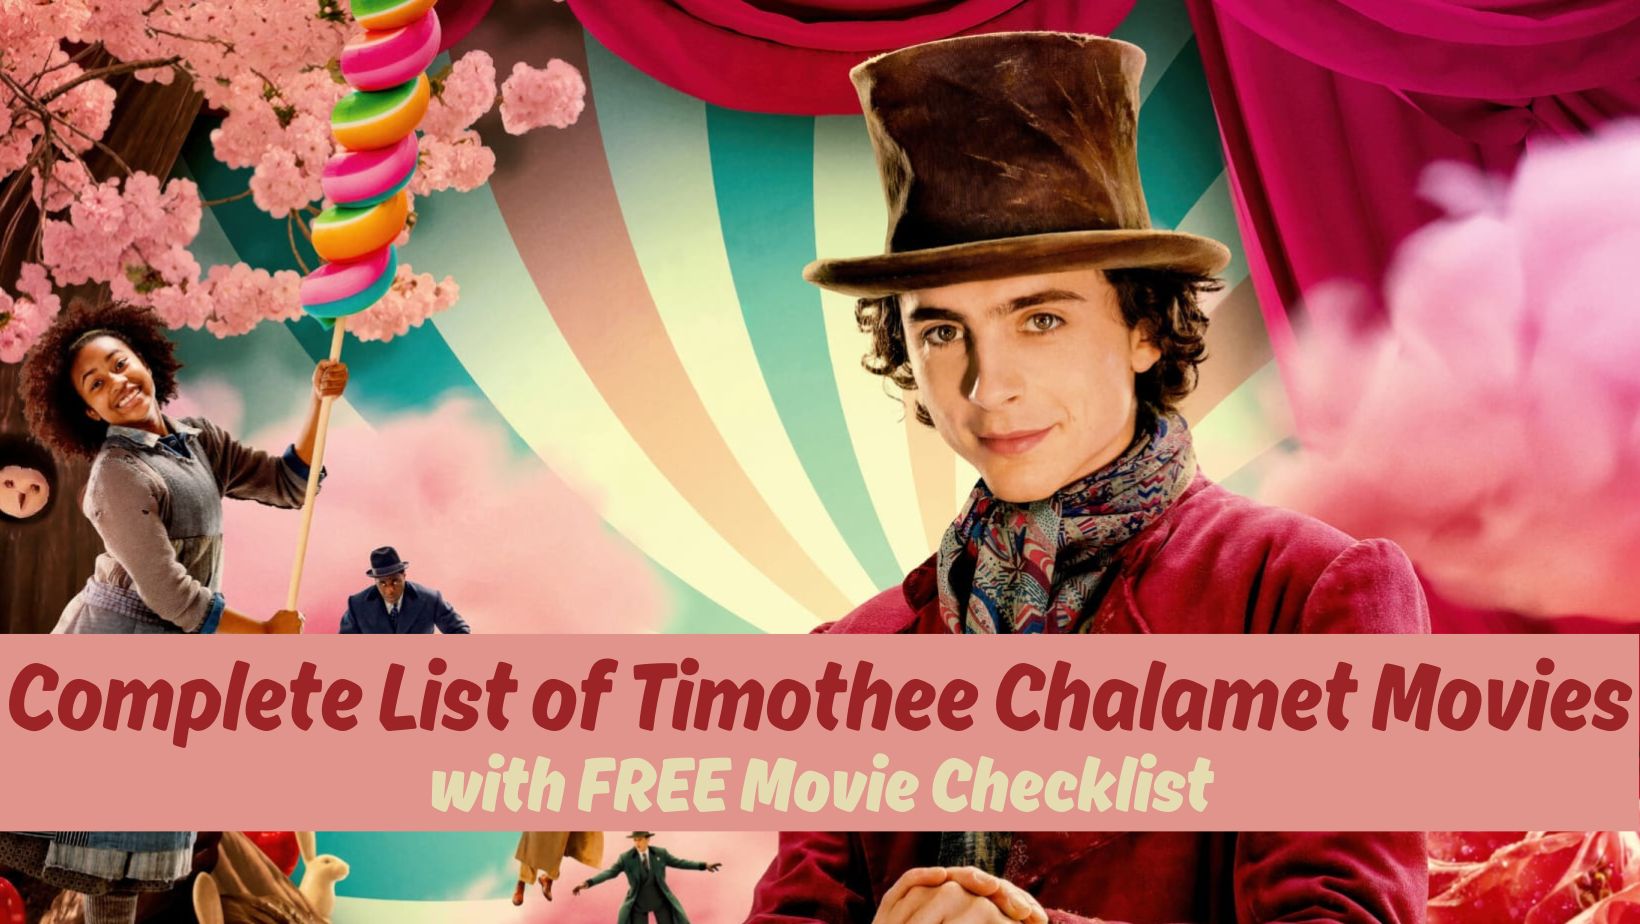 complete list of timothee chalamet movies with free movie checklist